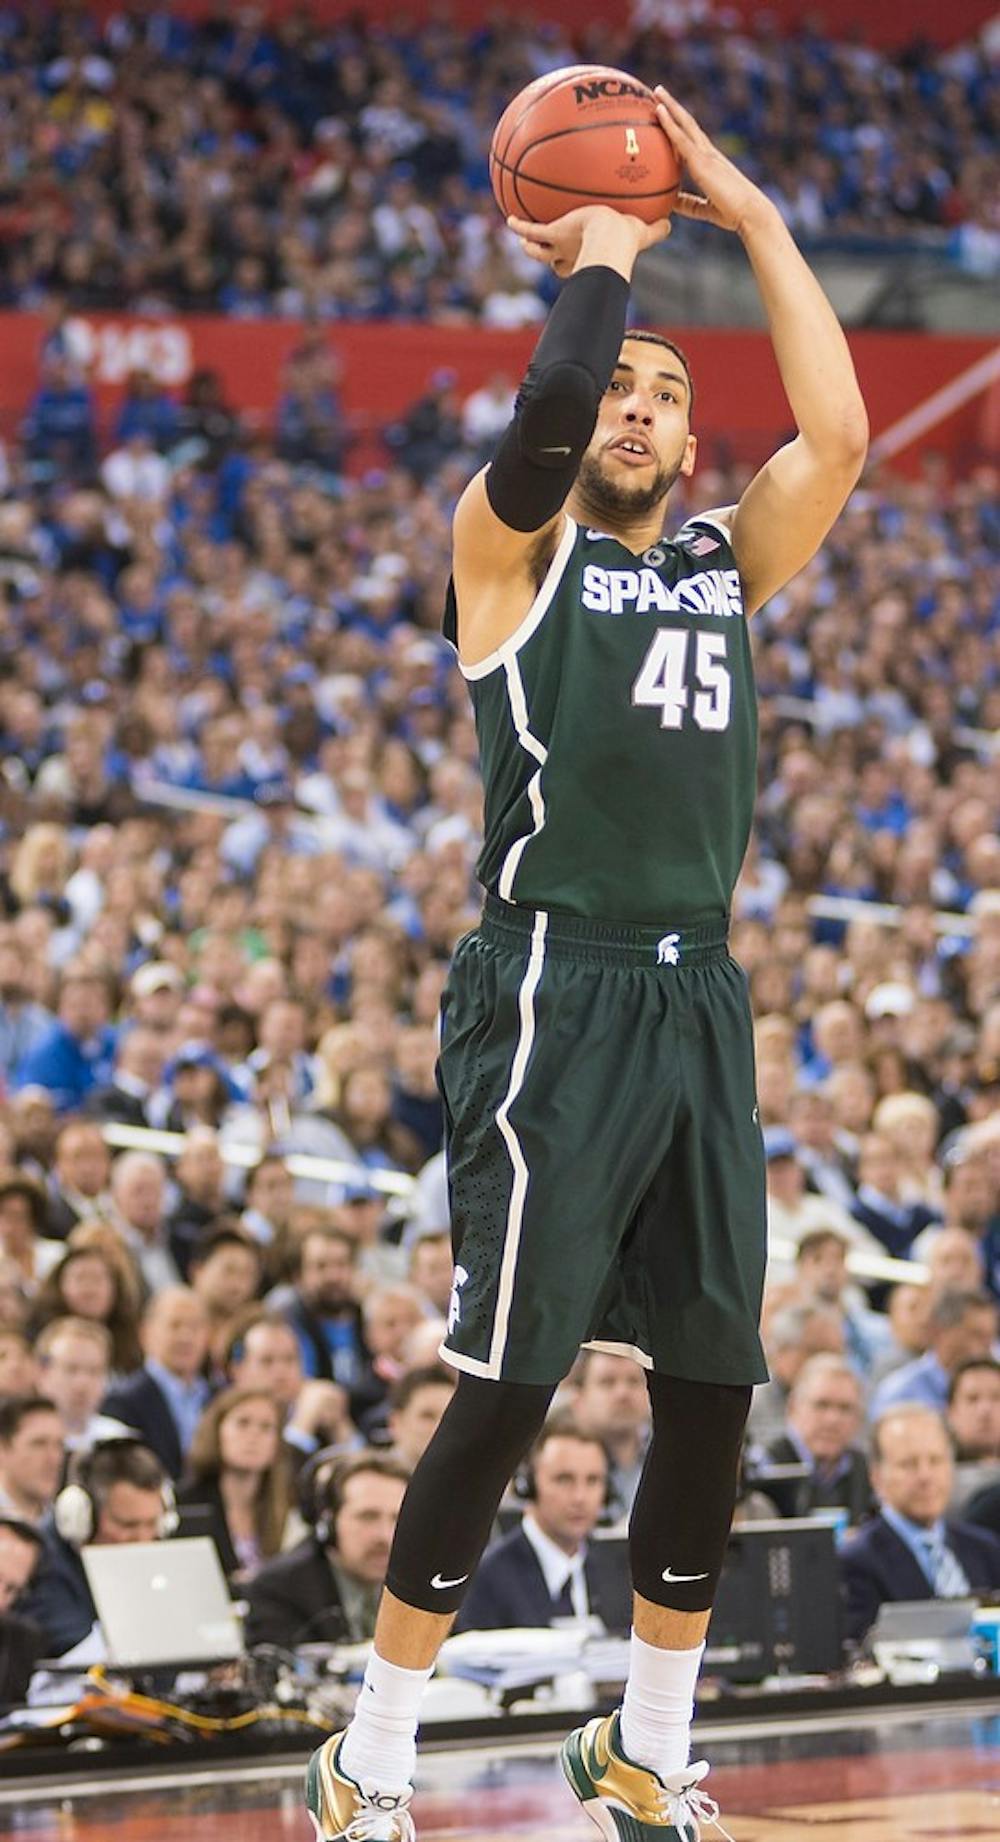 <p>Junior forward Denzel Valentine attempts a basket April 4, 2015, during the semi-final game of the NCAA Tournament in the Final Four round at Lucas Oil Stadium in Indianapolis, Indiana. The Spartans were defeated by the Blue Devils, 81-61. Erin Hampton/The State News</p>